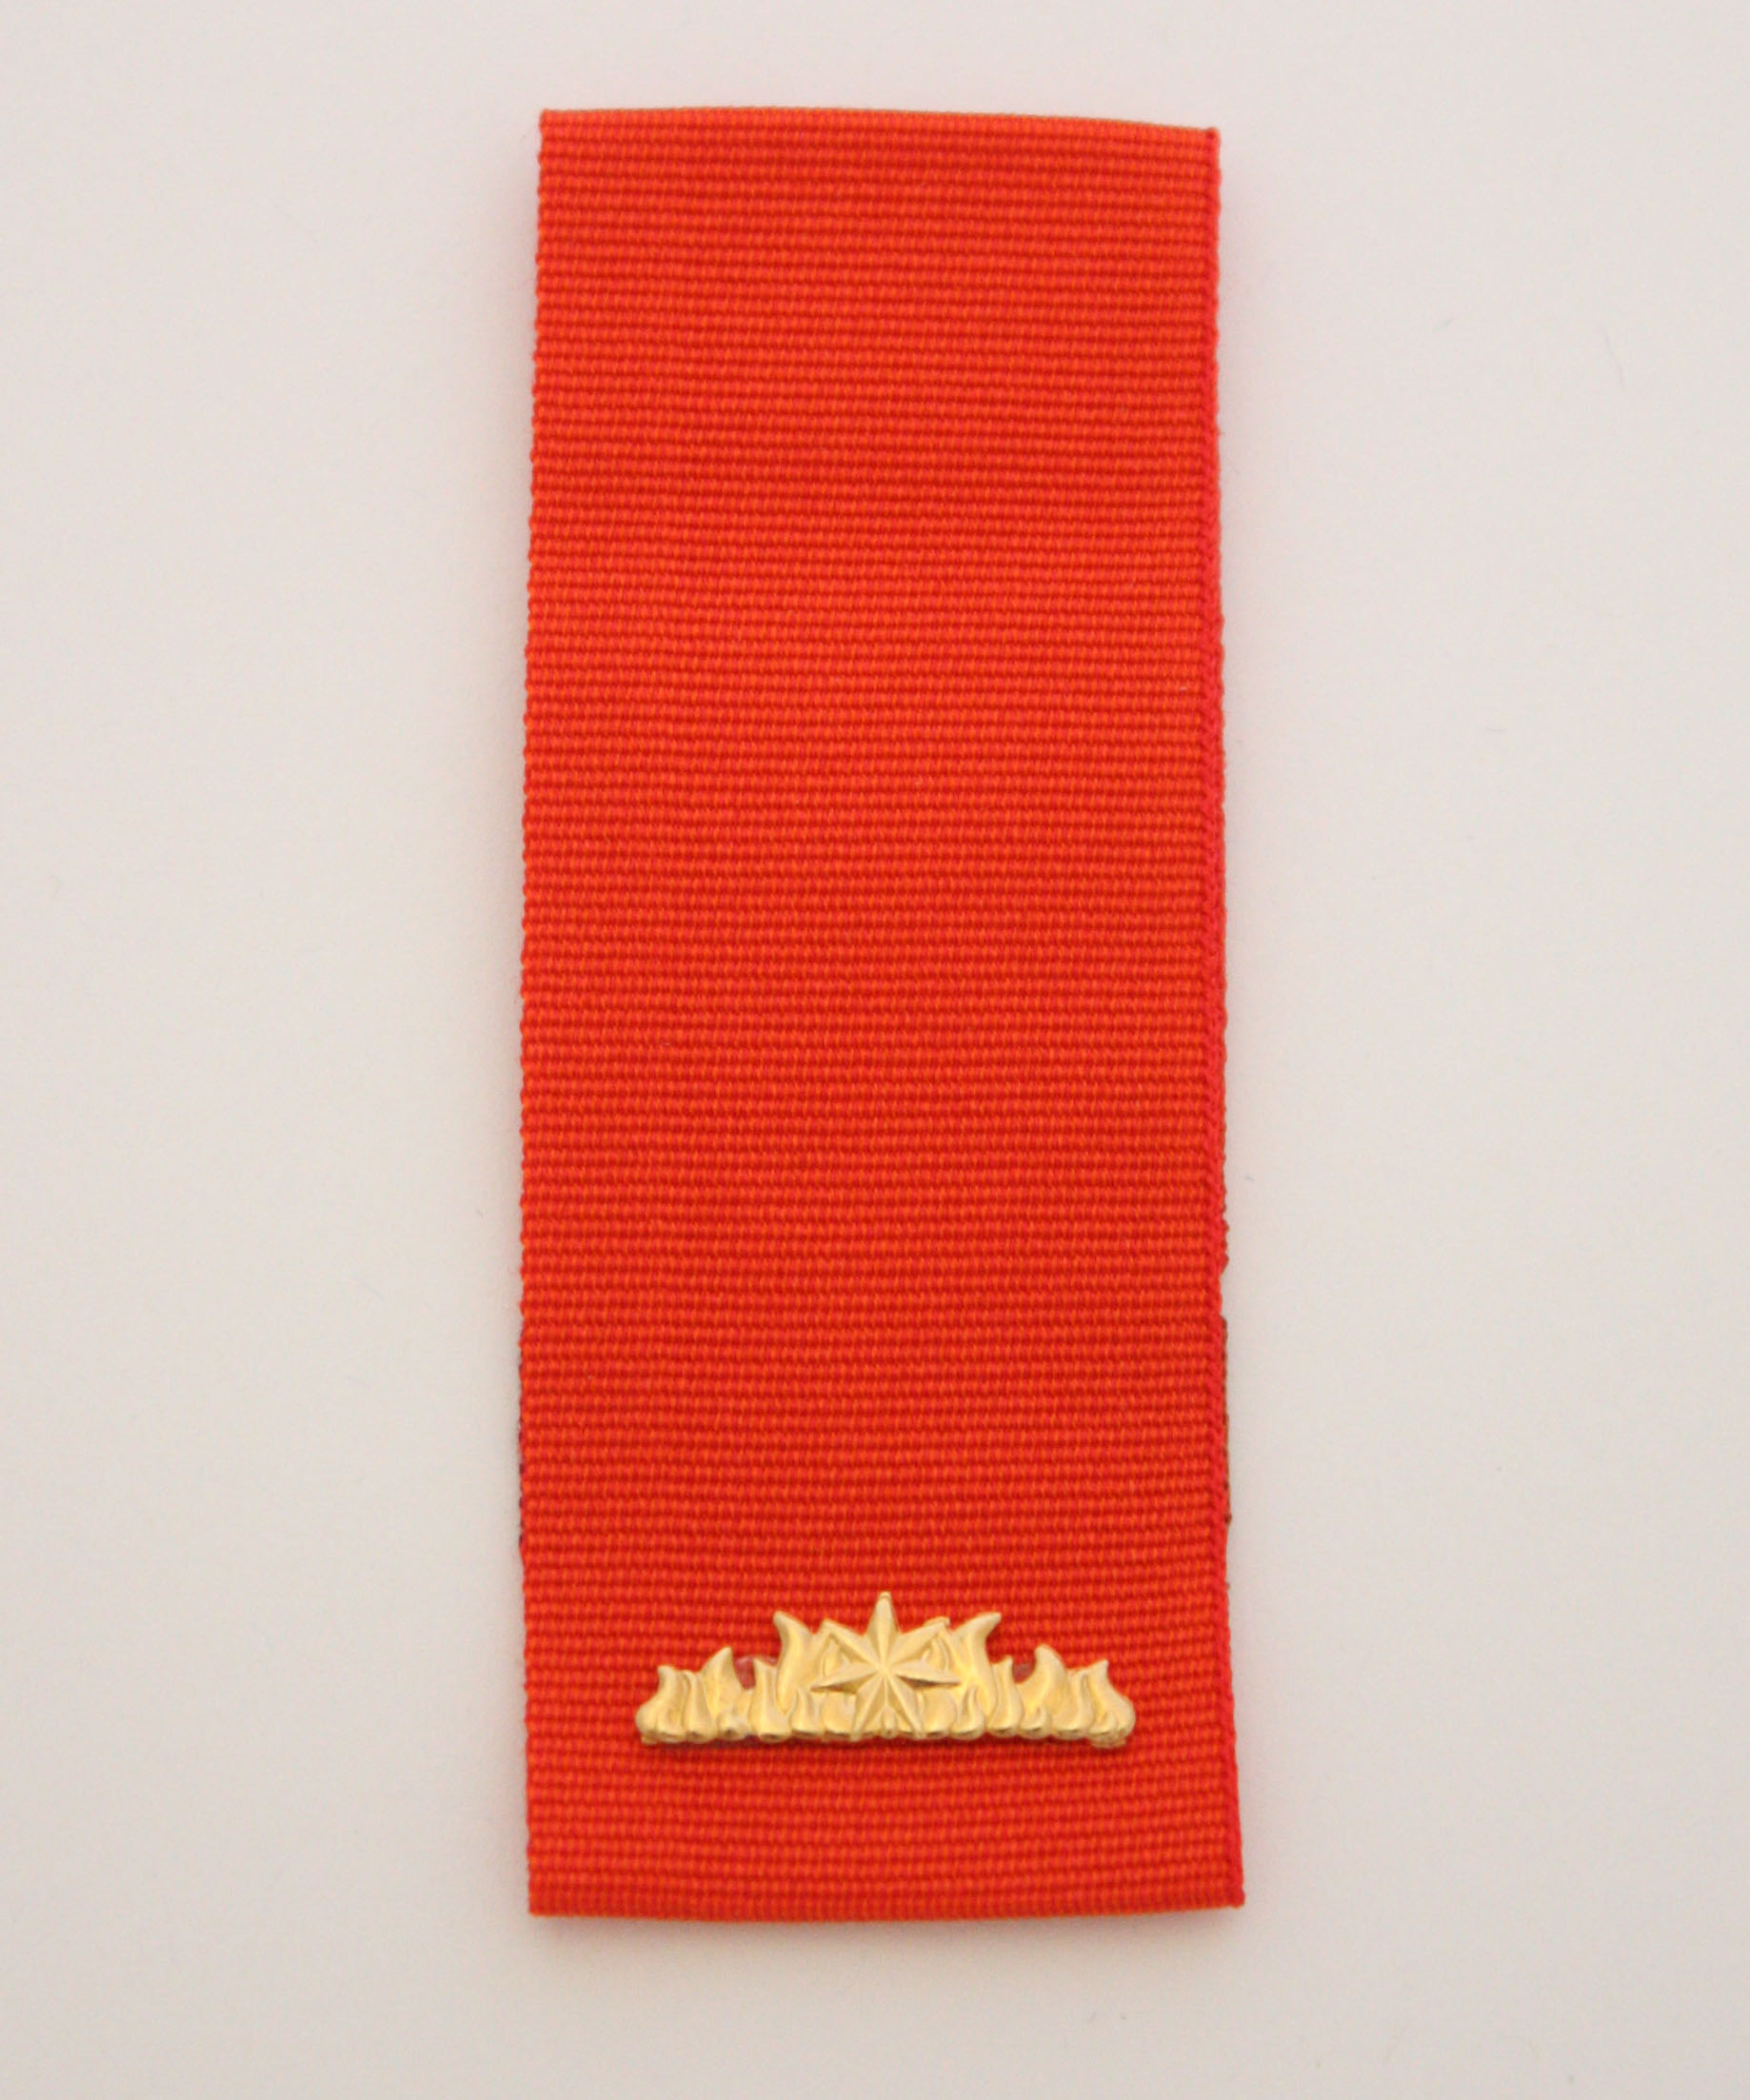 Commendation For Gallantry